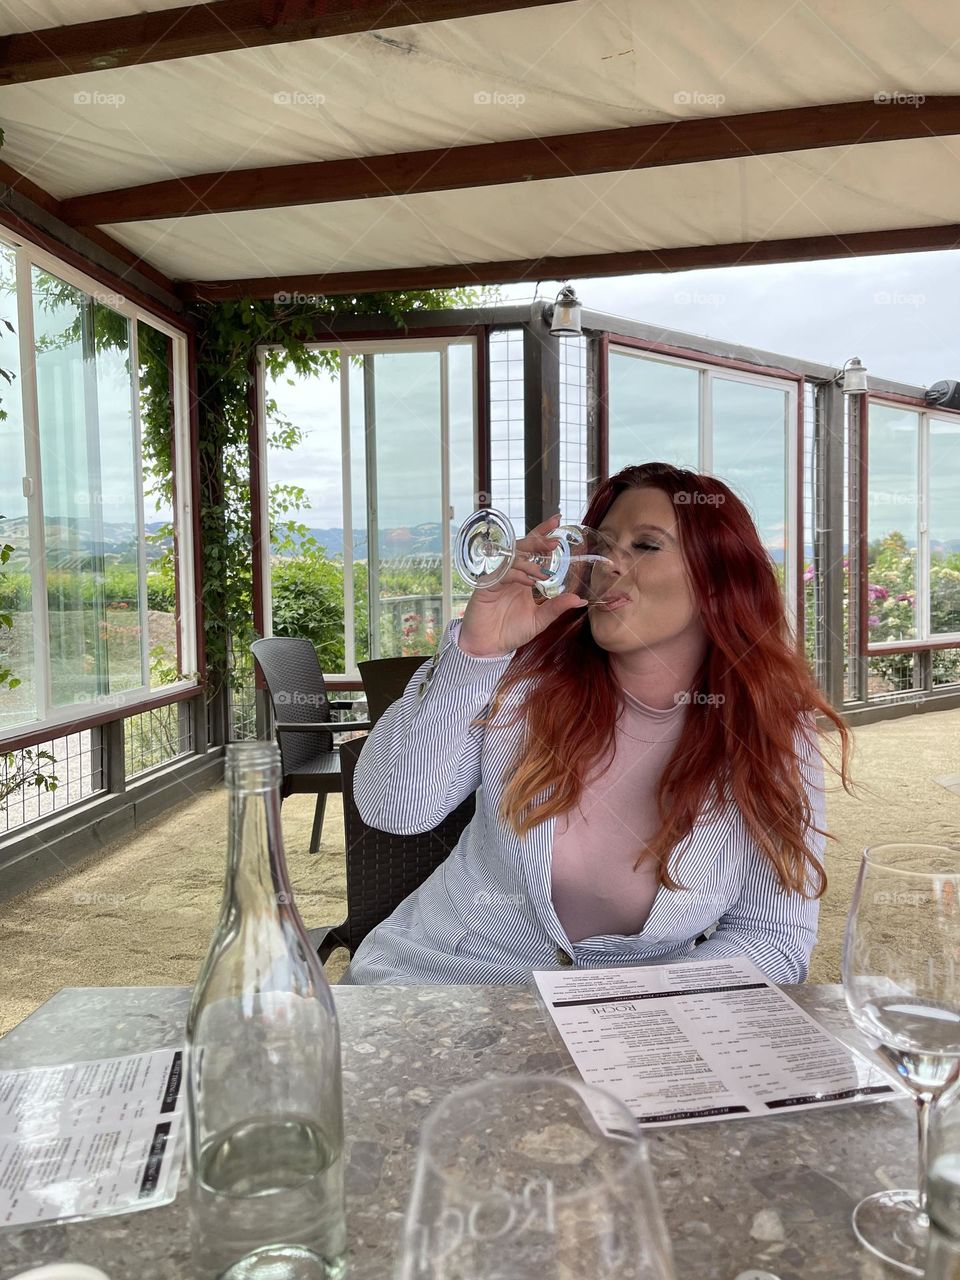 Sipping at a wine tasting in California, beautiful California winery backdrop. A brisk breeze blowing through my hair as my lips taste the last sip of that fruity wine.